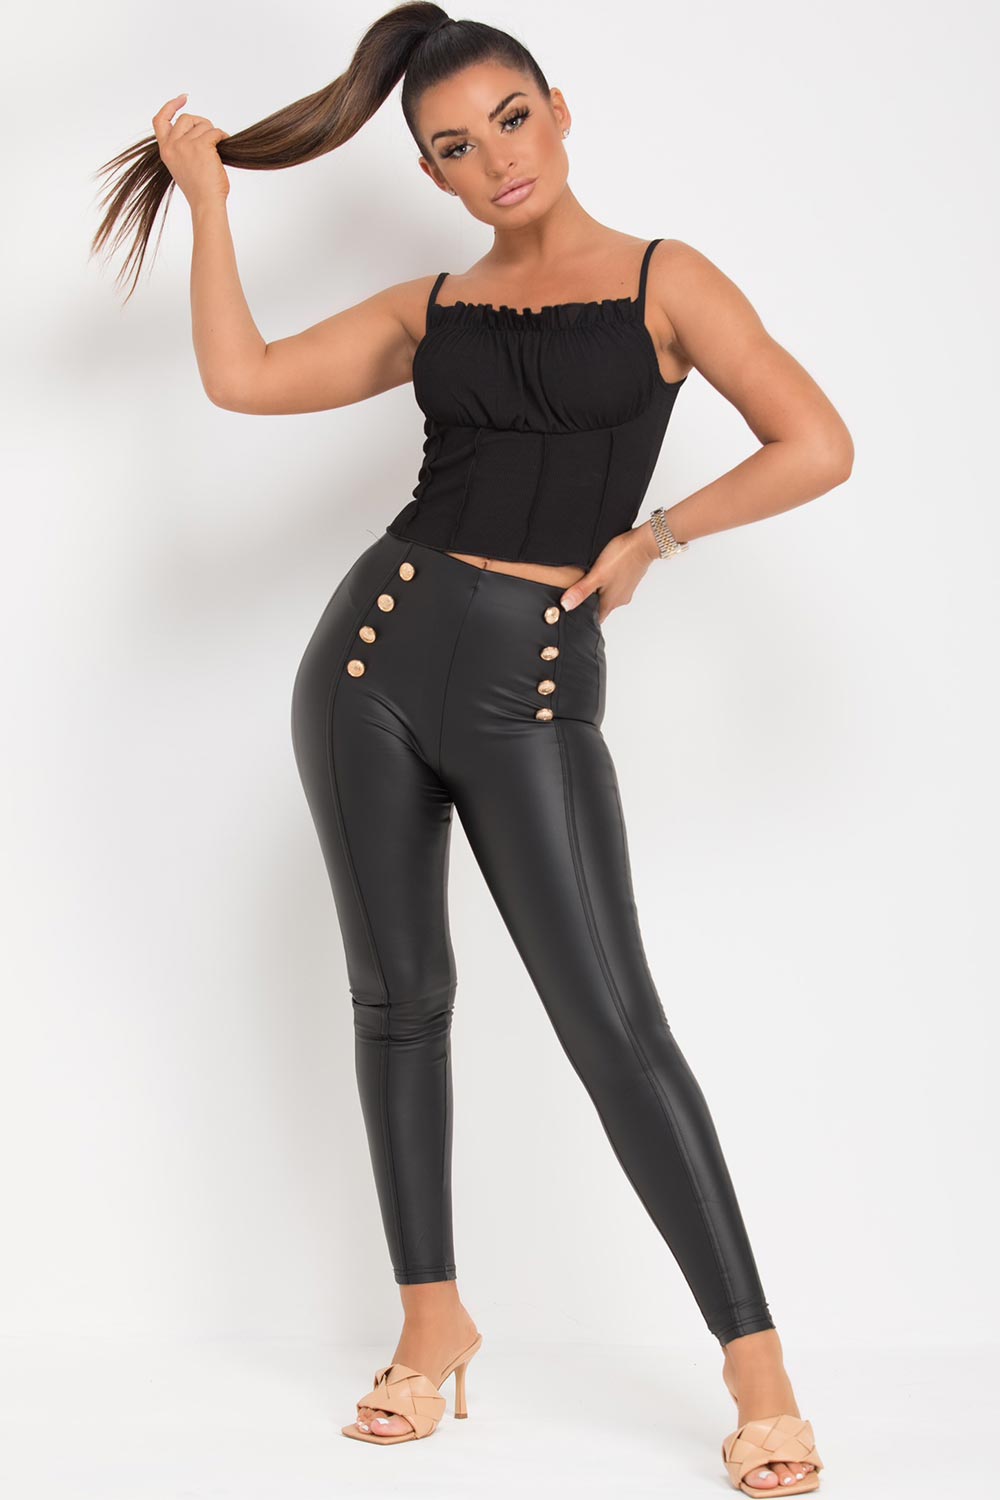 Black Faux Leather High Waist Leggings With Gold Buttons Vegan